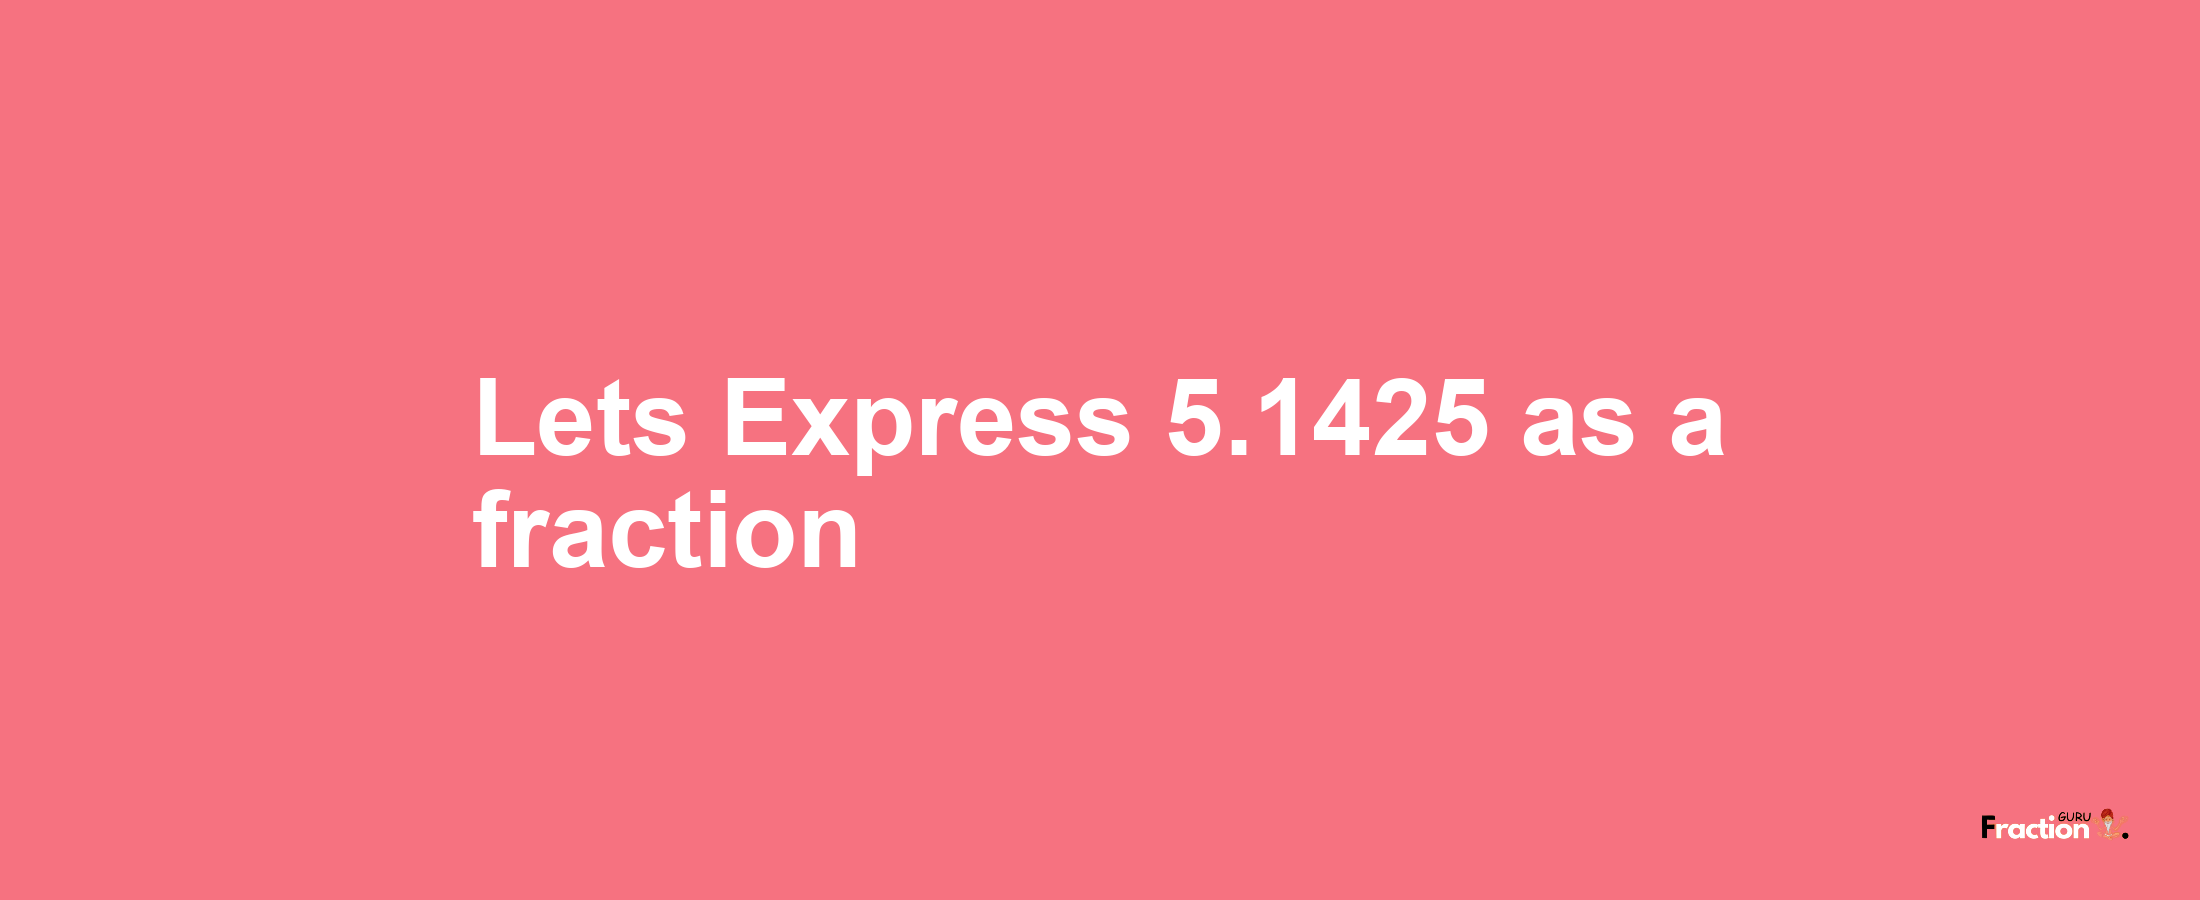 Lets Express 5.1425 as afraction